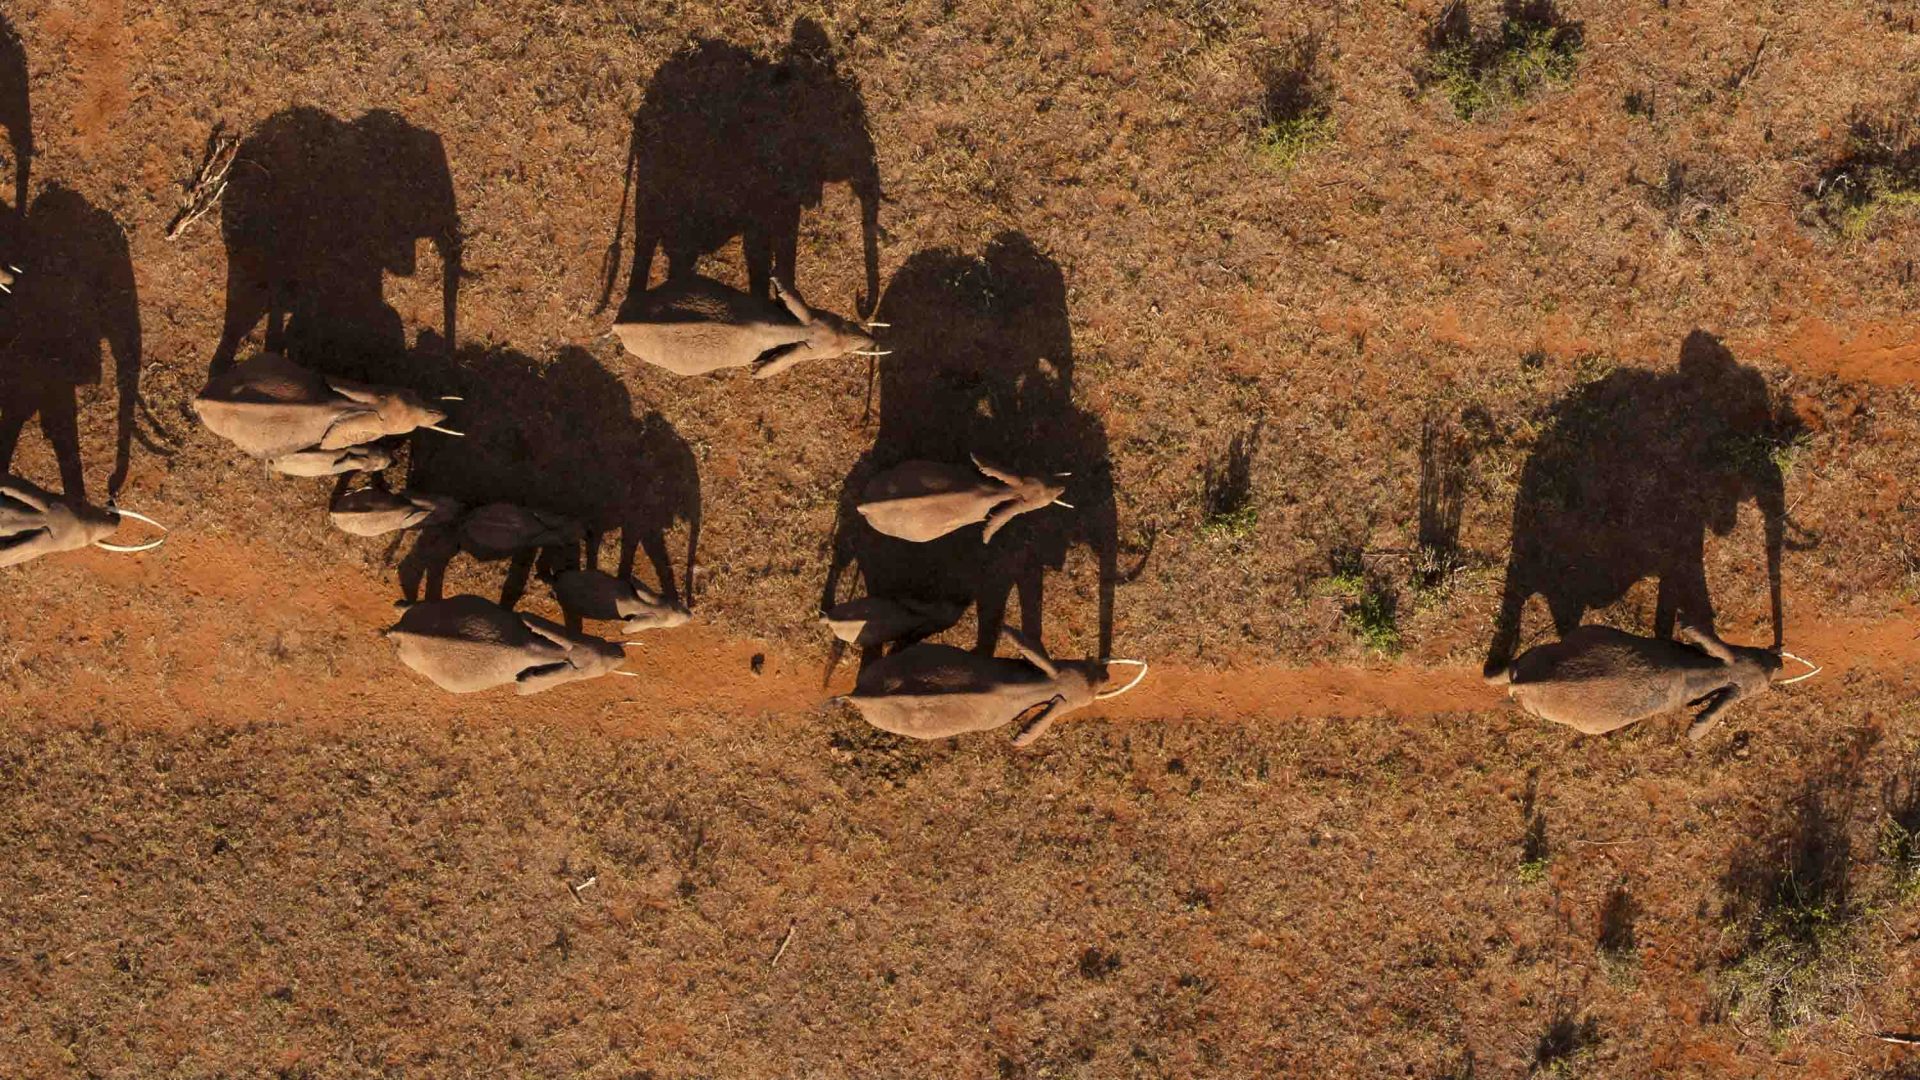 Elephants seen from above, cast shadows across the red earth.